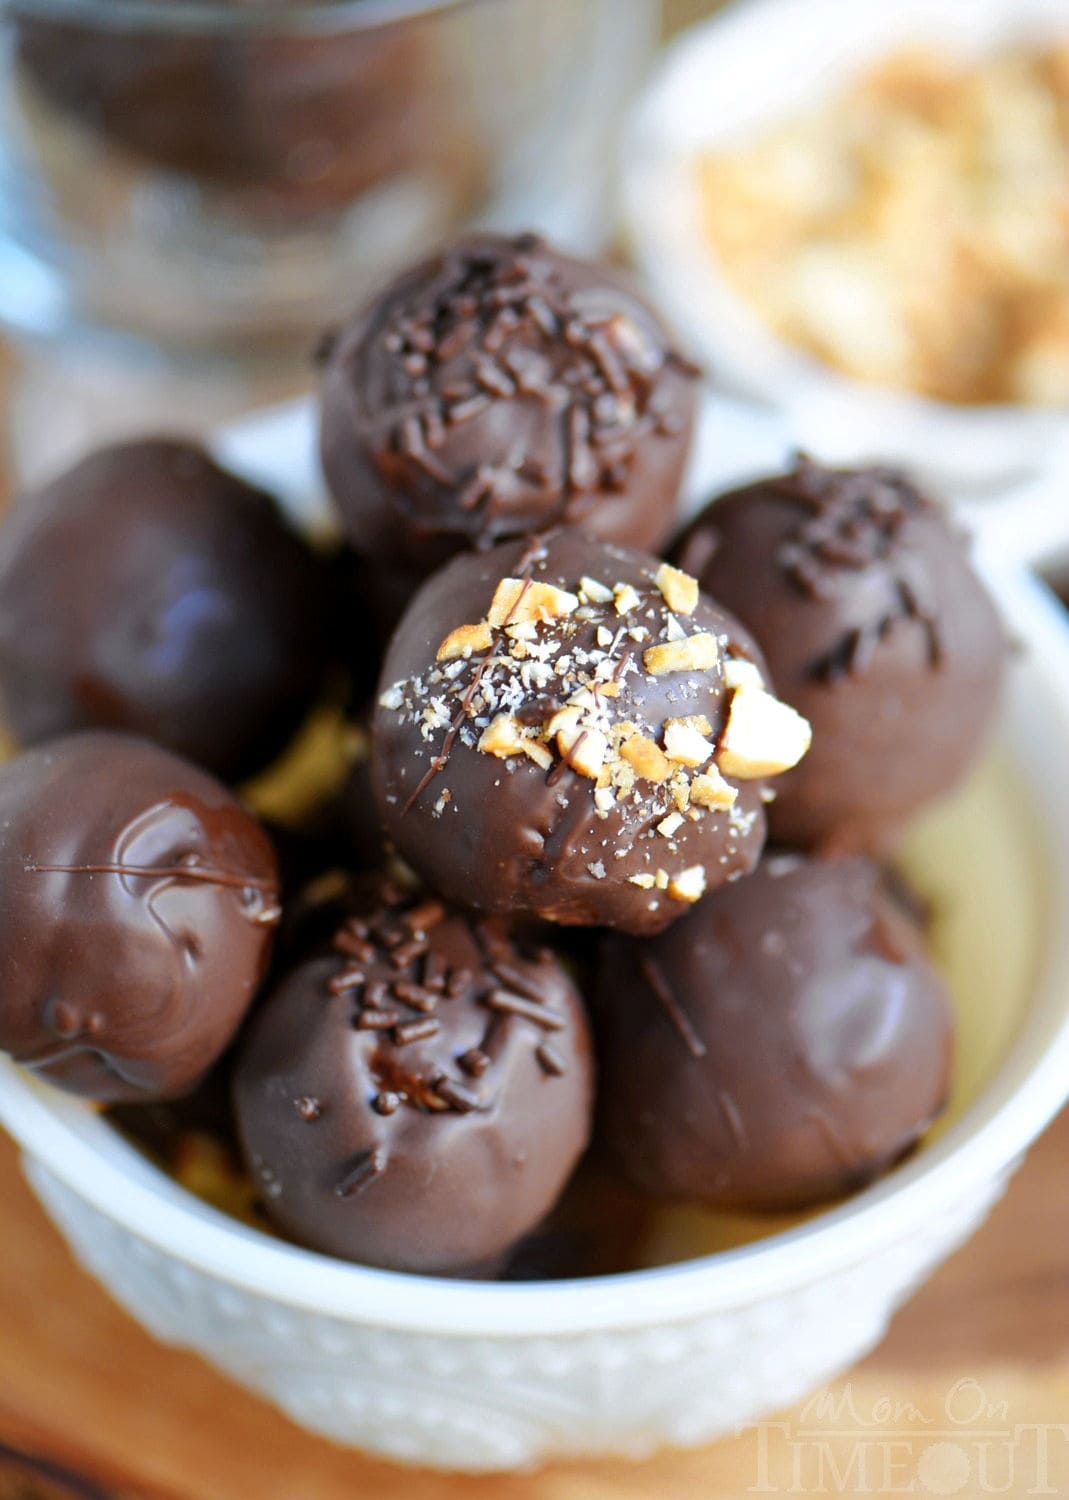 whole chocolate peanut butter balls in a white glass bowl ready to be enjoyed.